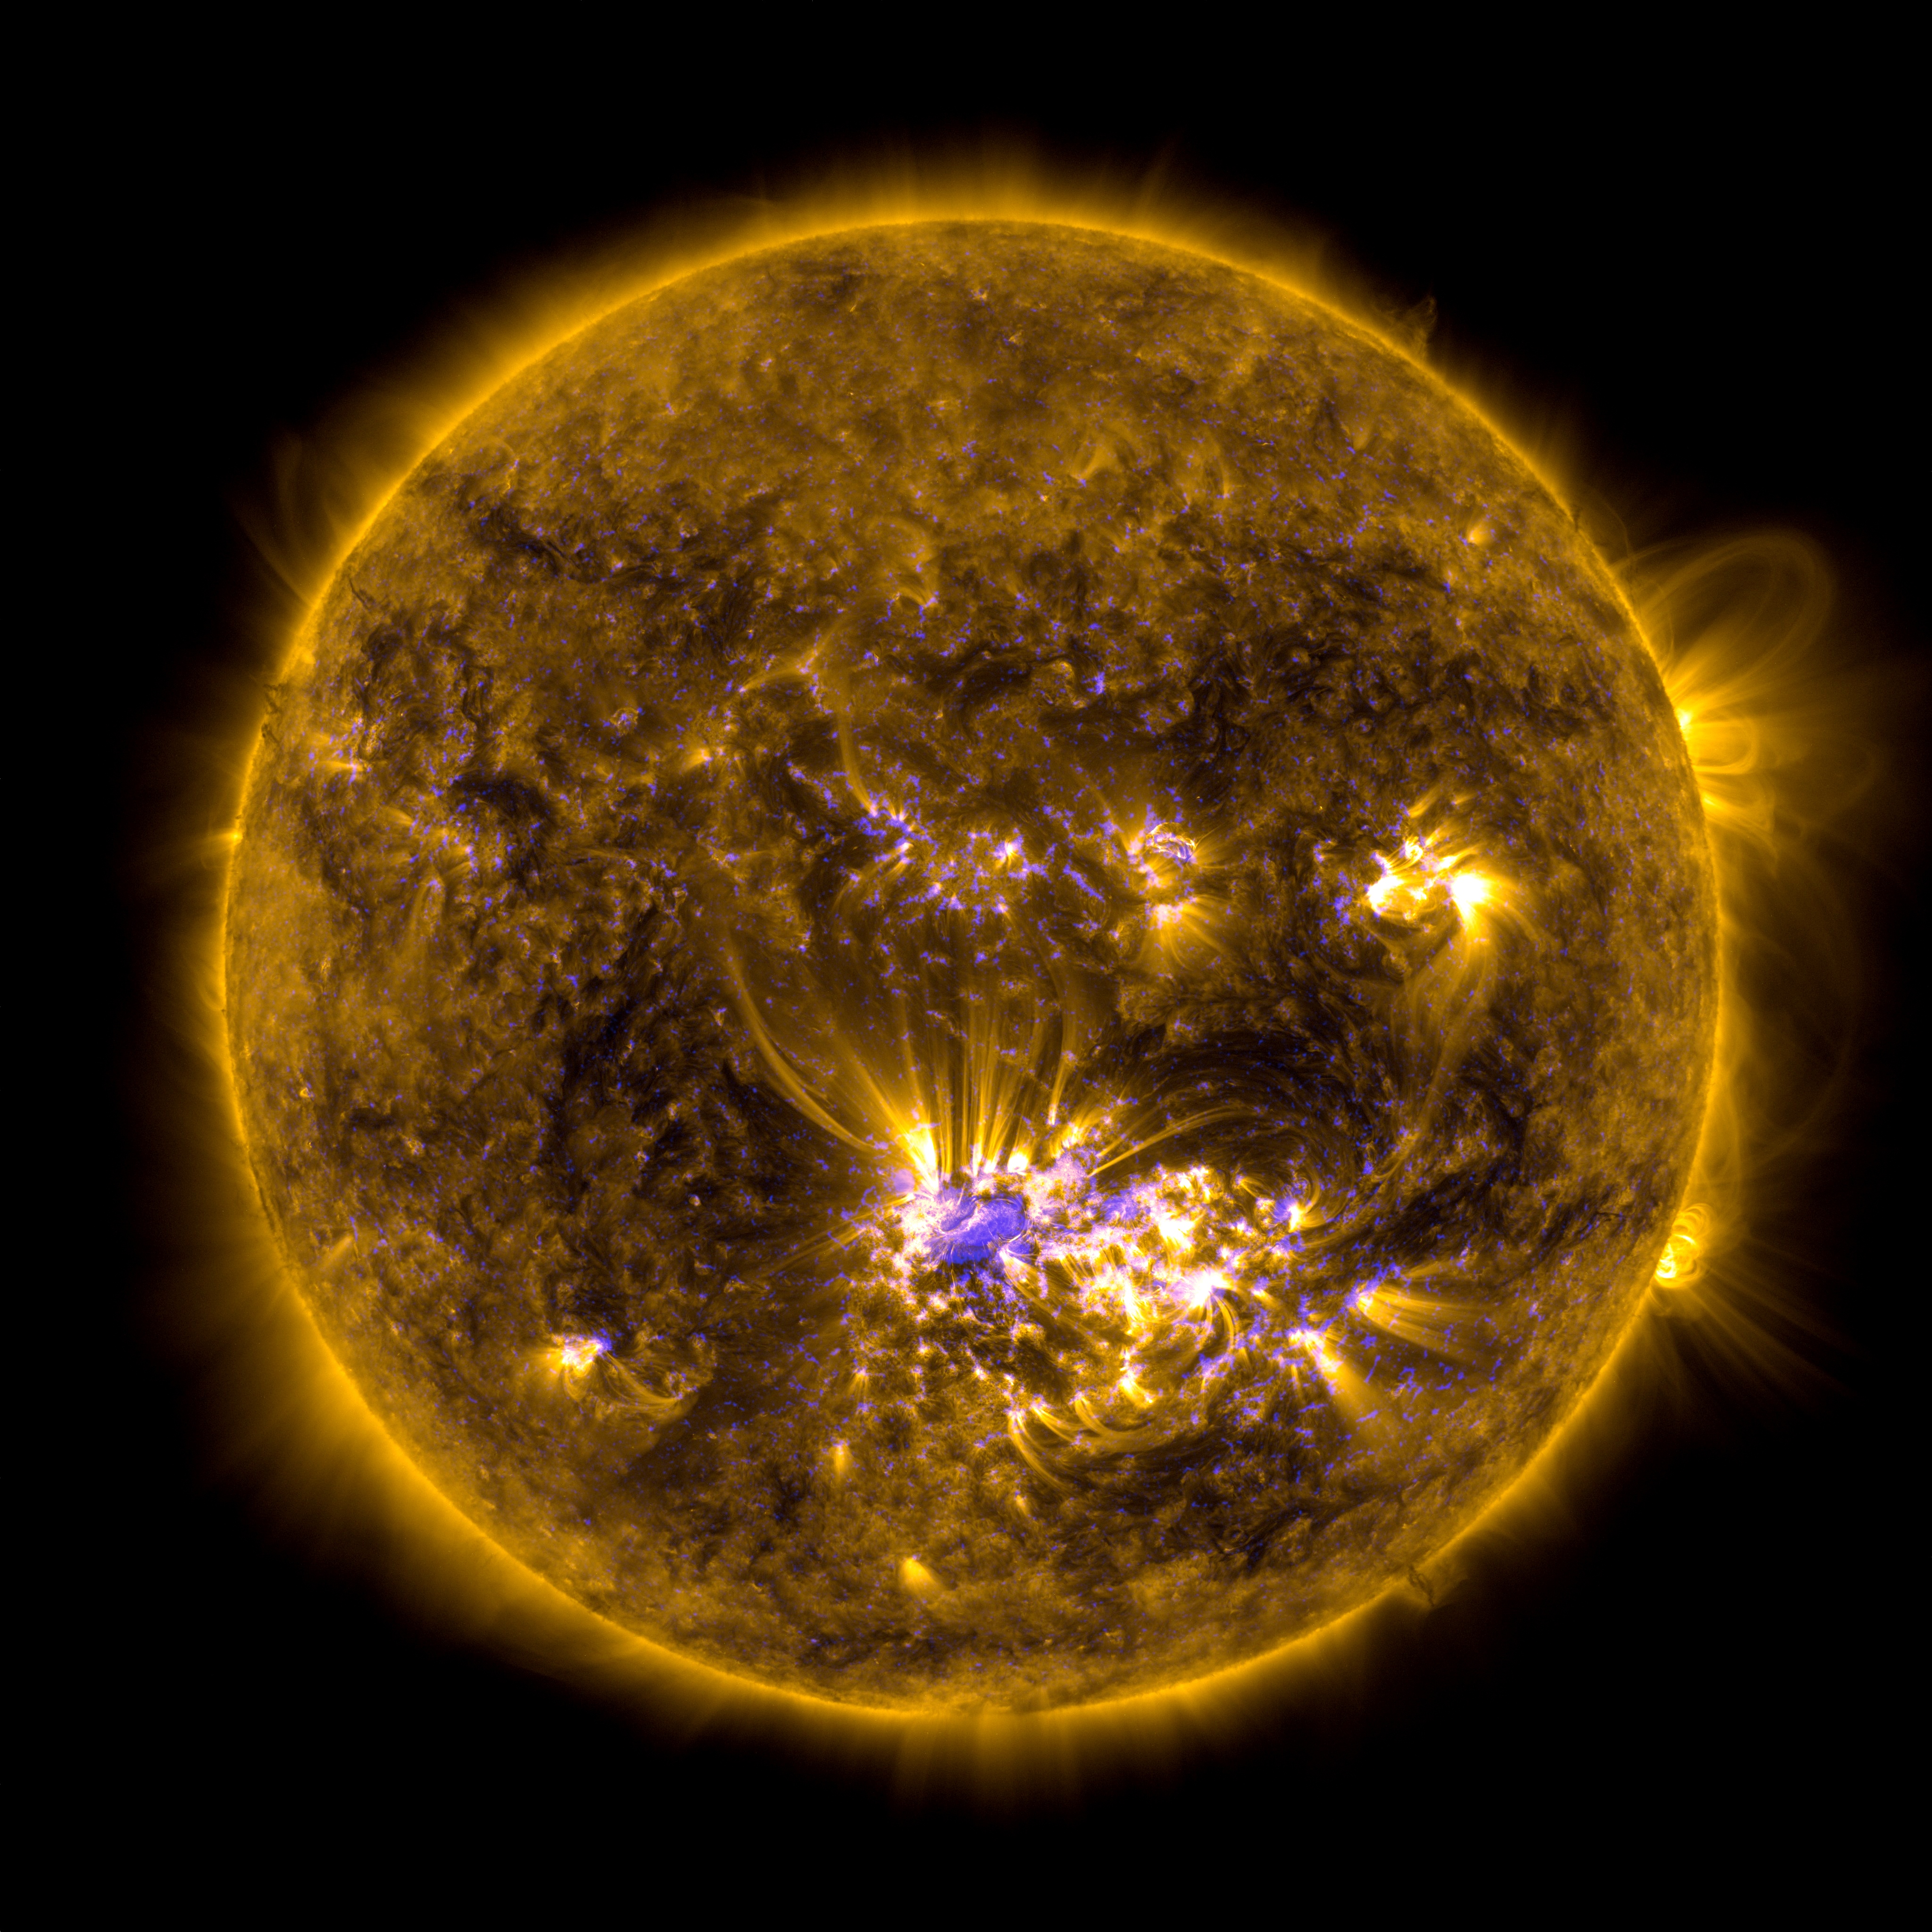 This image combines two sets of observations of the sun at 10:45 AM EDT, July 12, 2012 from the Solar Dynamics Observatory (SDO) to give an impression of what the sun looked like shortly before it unleashed an X-class flare beginning at 12:11 PM EDT.  The image incorporates light in the 171 angstrom wavelength, which shows off giant loops of solar material overlying the middle of the sun over Active Region 1520 where the flare originated.  The second set of observations is called a magnetogram, which highlights magnetic fields on the sun. Together these kinds of observations can help scientists understand the magnetic properties of the sun that lead to giant explosions like flares. 